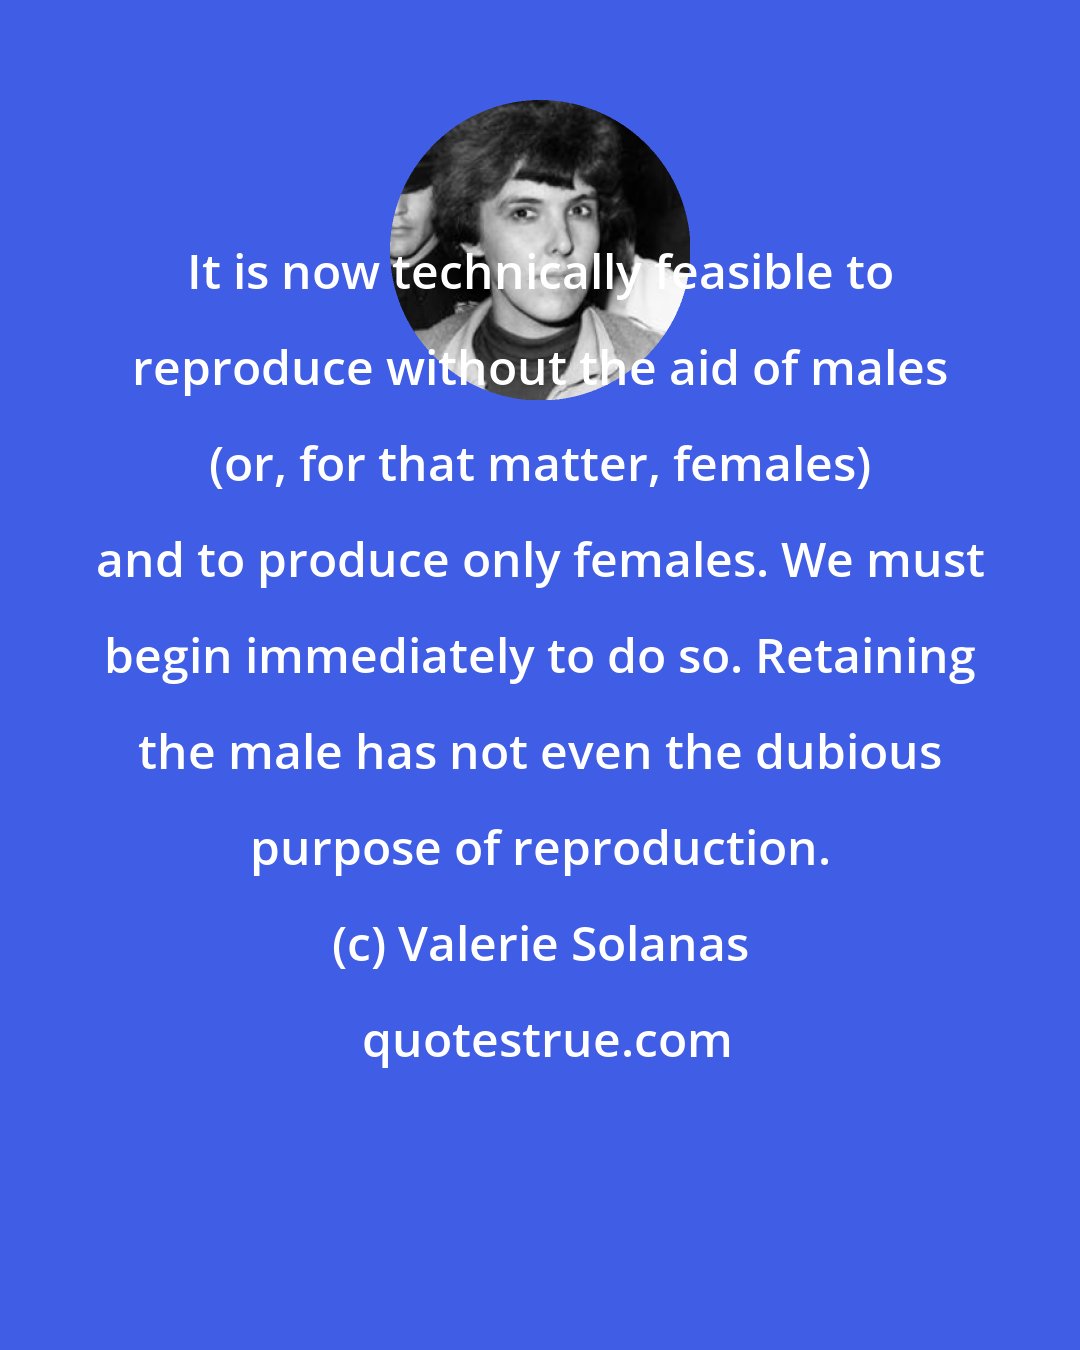 Valerie Solanas: It is now technically feasible to reproduce without the aid of males (or, for that matter, females) and to produce only females. We must begin immediately to do so. Retaining the male has not even the dubious purpose of reproduction.